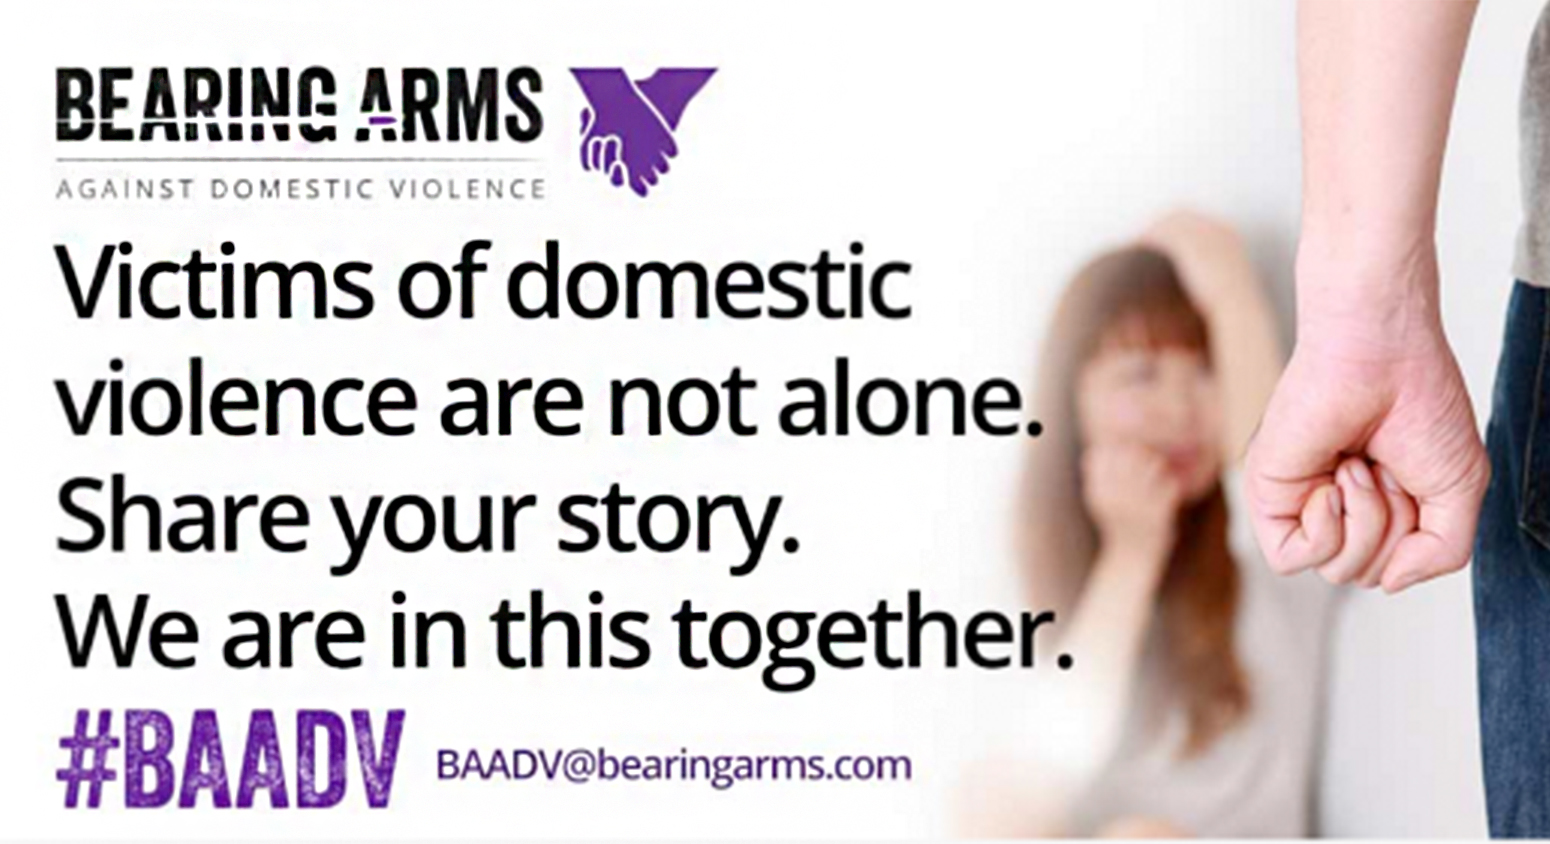 The Bearing Arms Against Domestic Violence Campaign